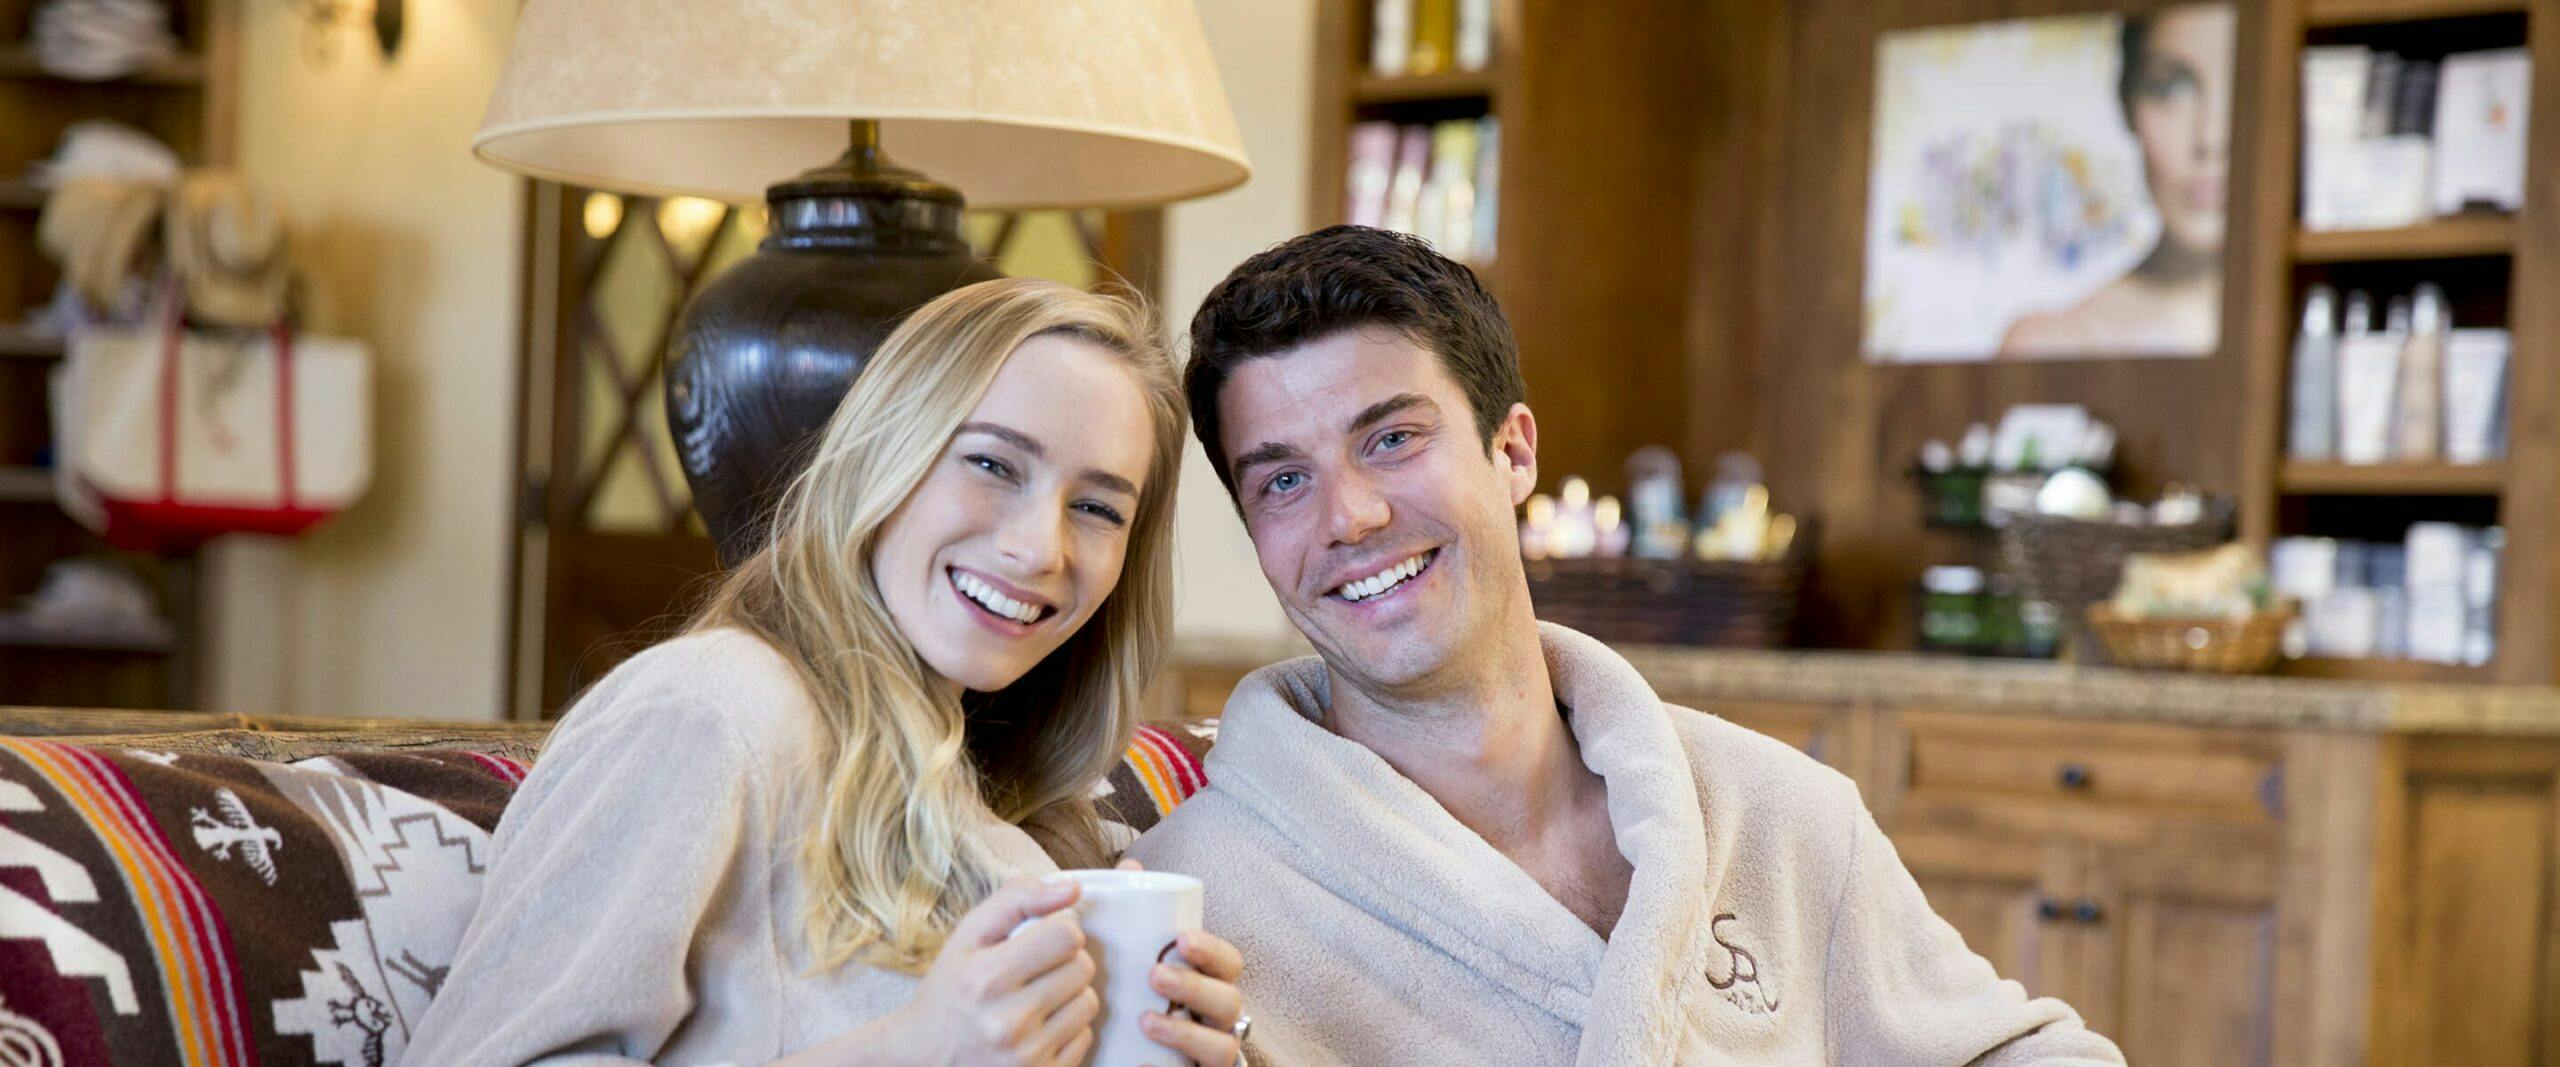 couple relaxed on a couch smiling for a photo